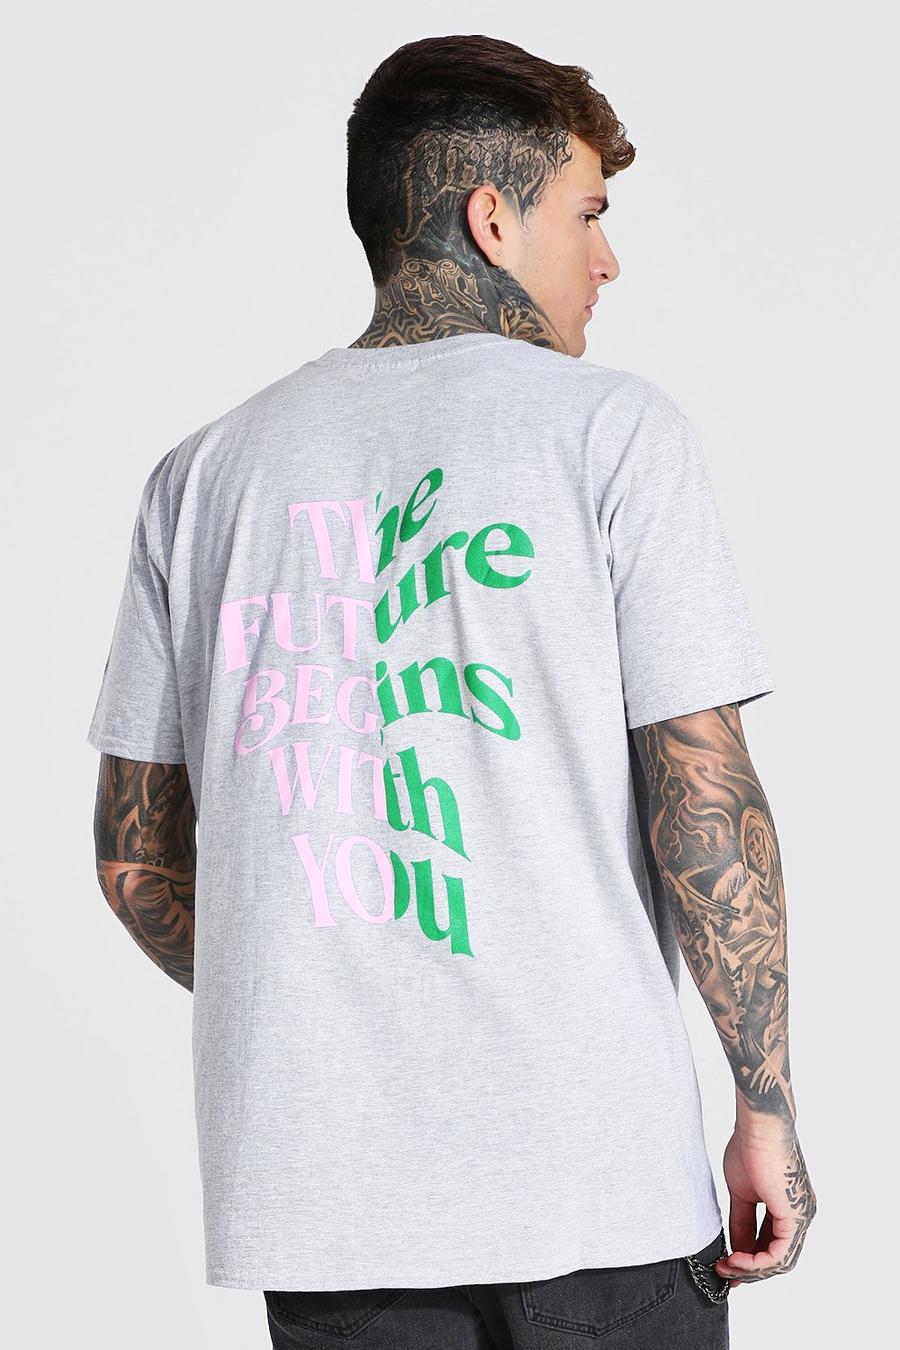 Camiseta ancha con eslogan “The Futures With You”, Marga gris image number 1